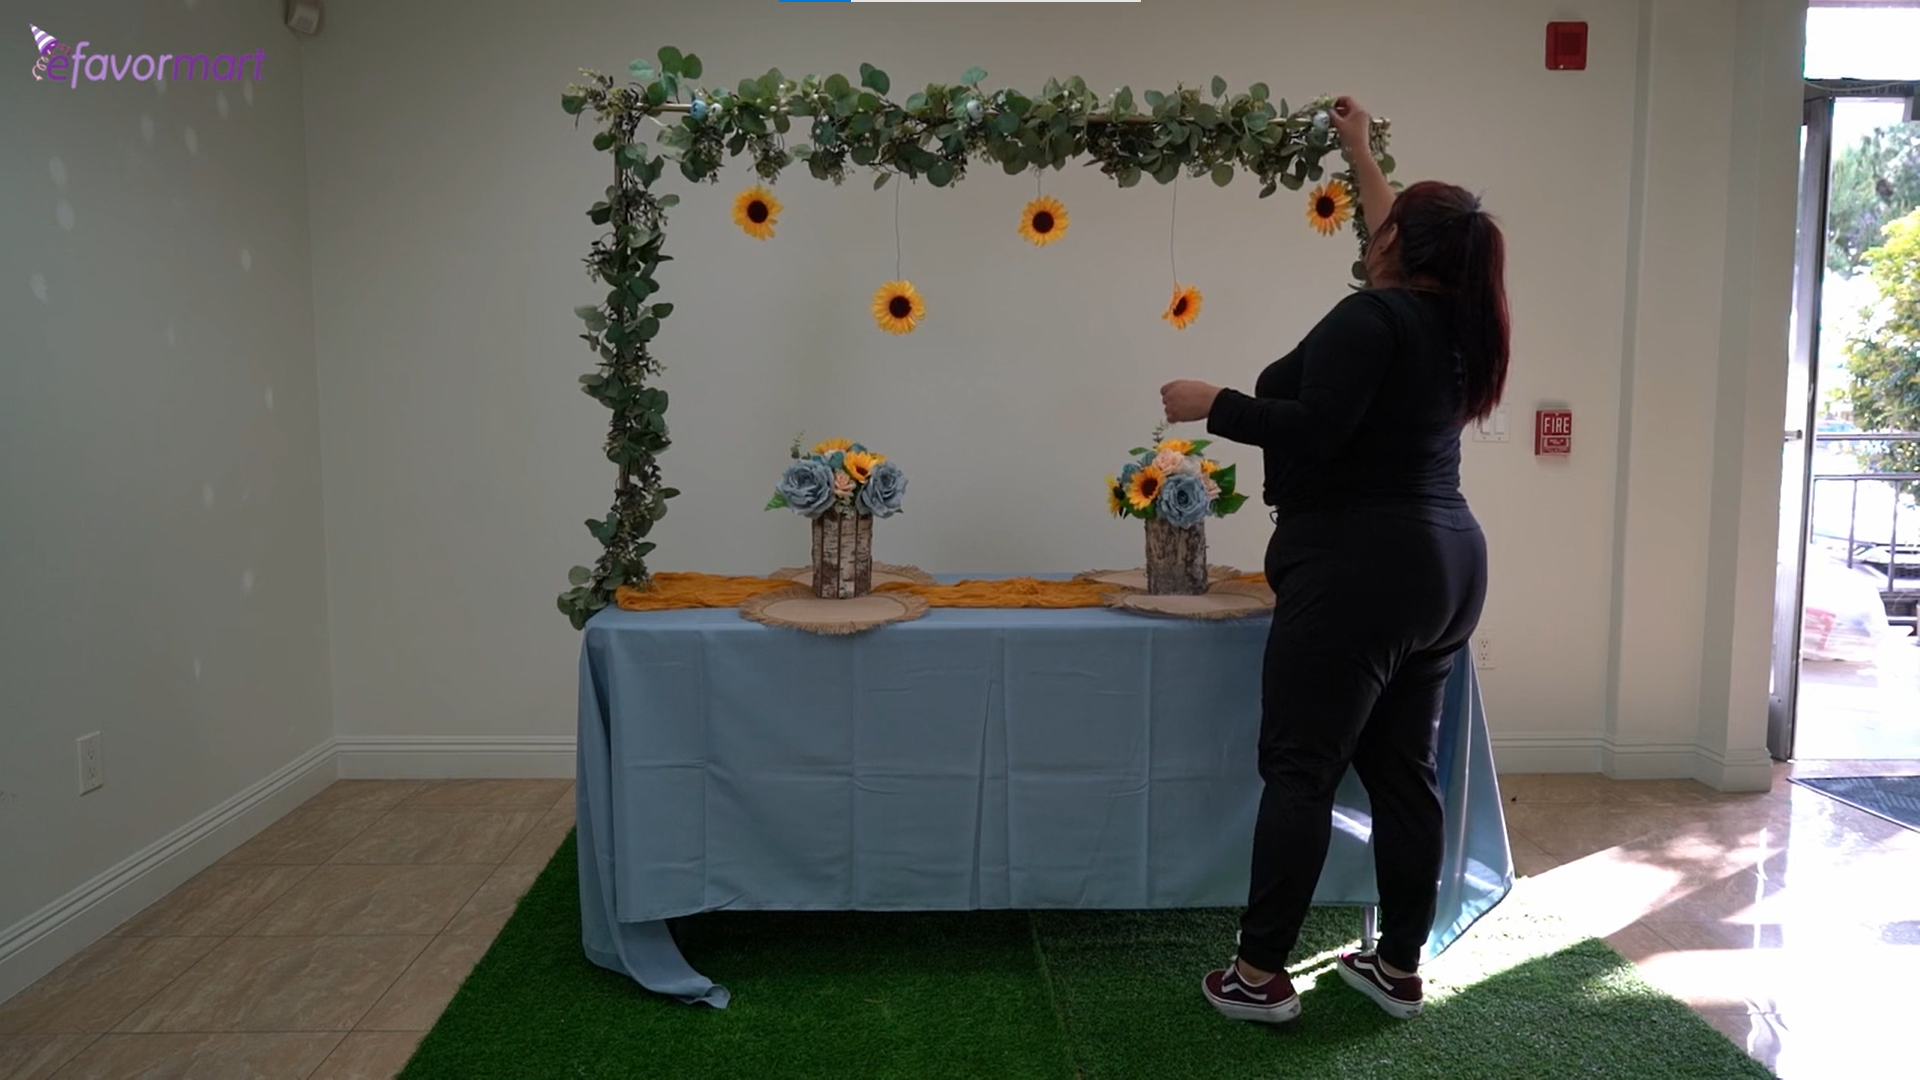 Person setting up the table floral decor